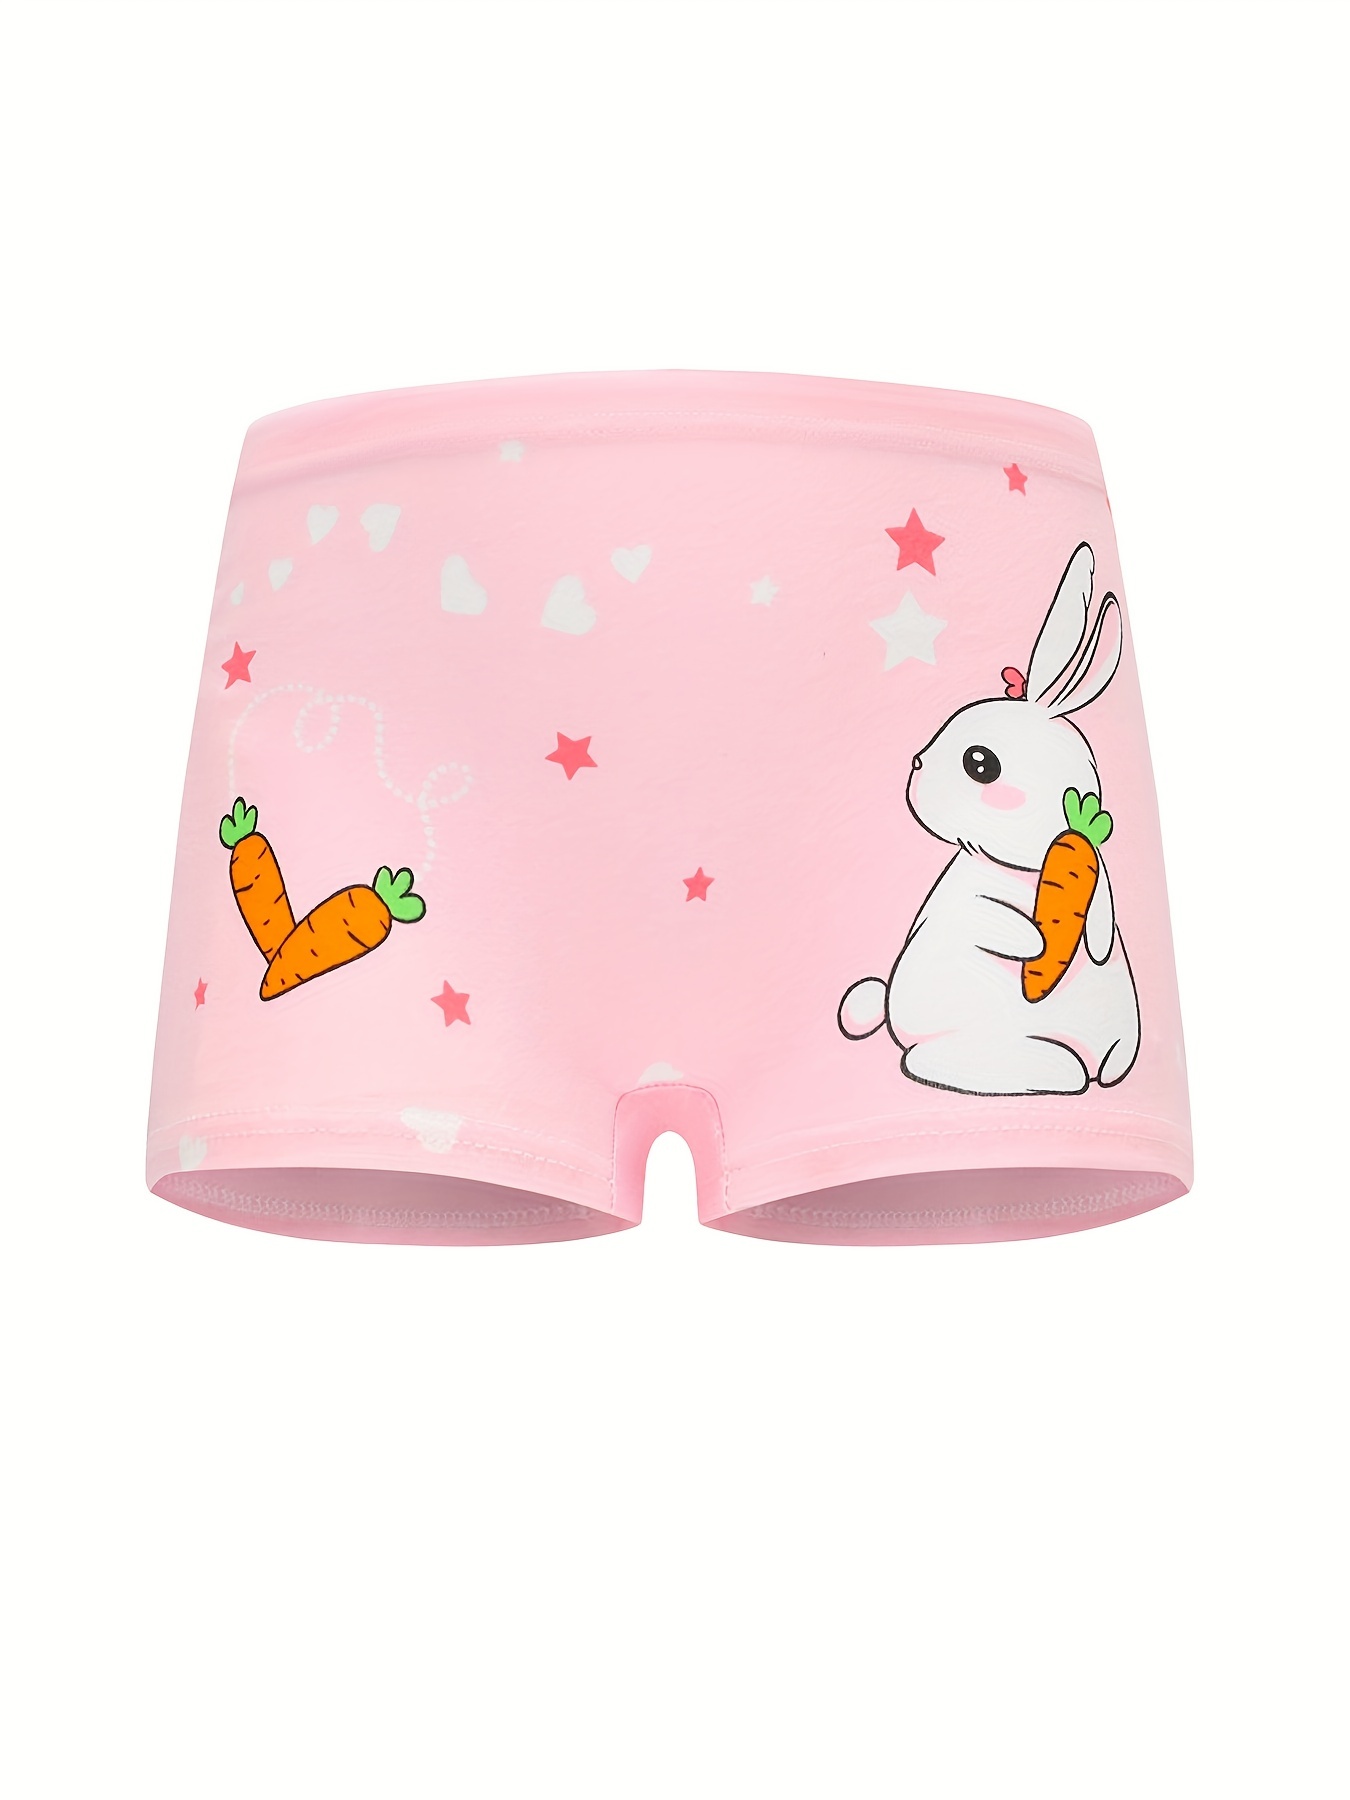 Cartoon Rabbit Print Cotton Panty Shorts For Girls Breathable Princess  Underwear /Pack From Cong05, $11.19